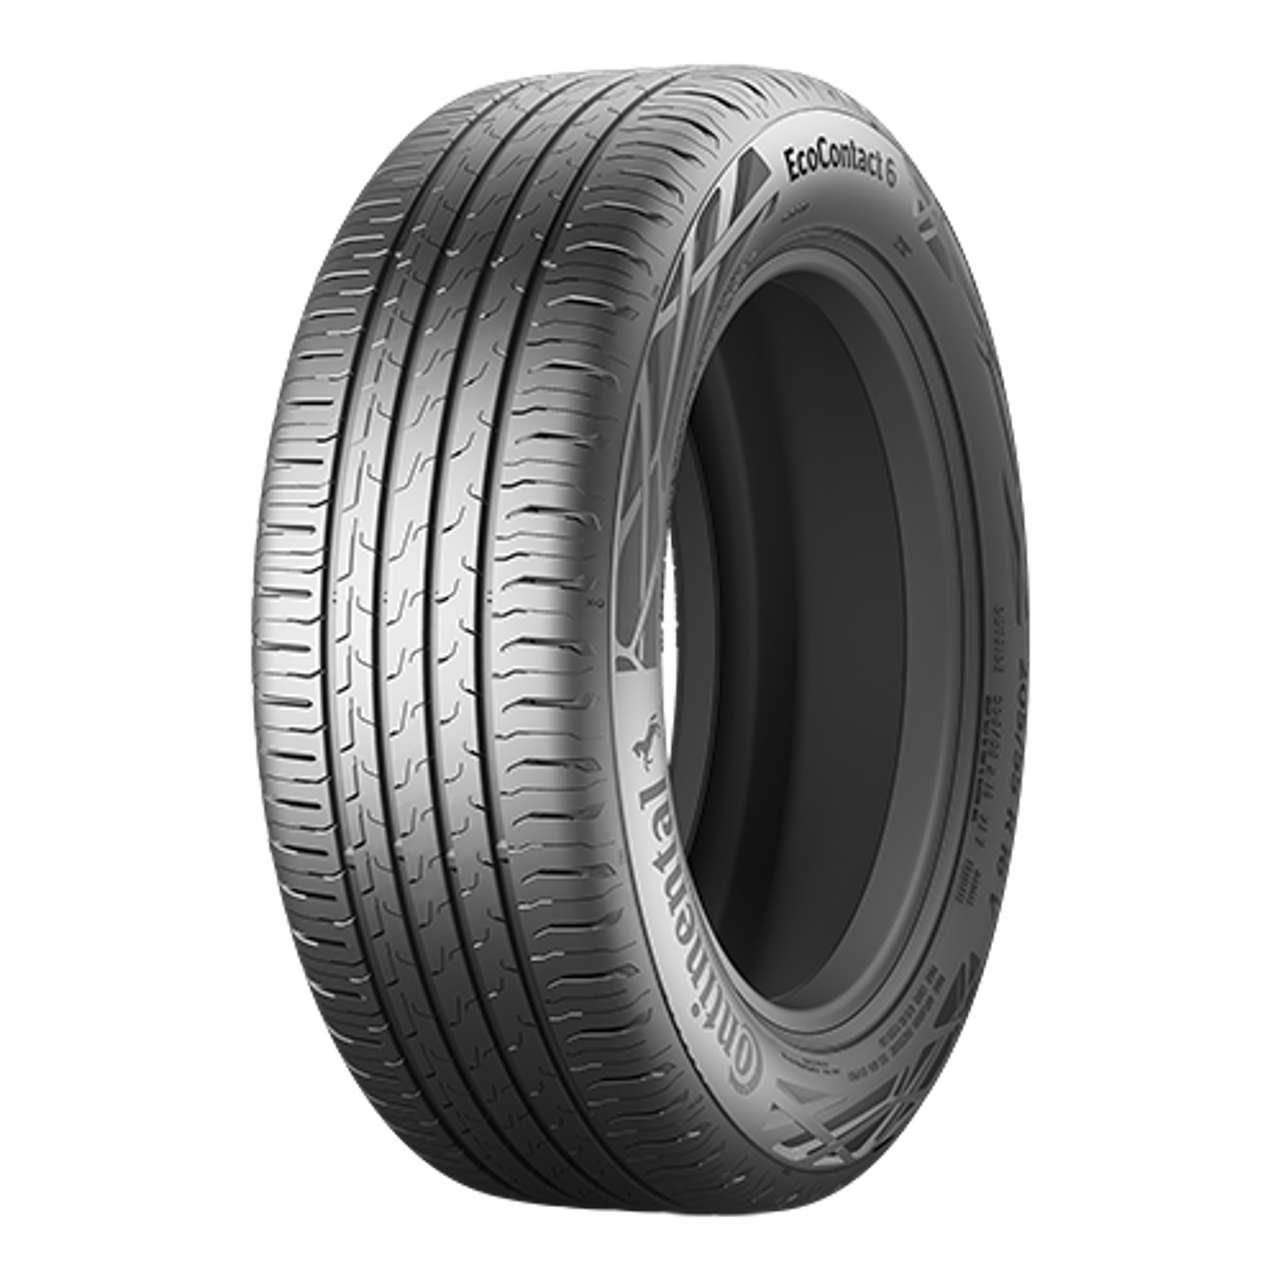 CONTINENTAL ECOCONTACT 6 (EVc) 195/60R15 88H